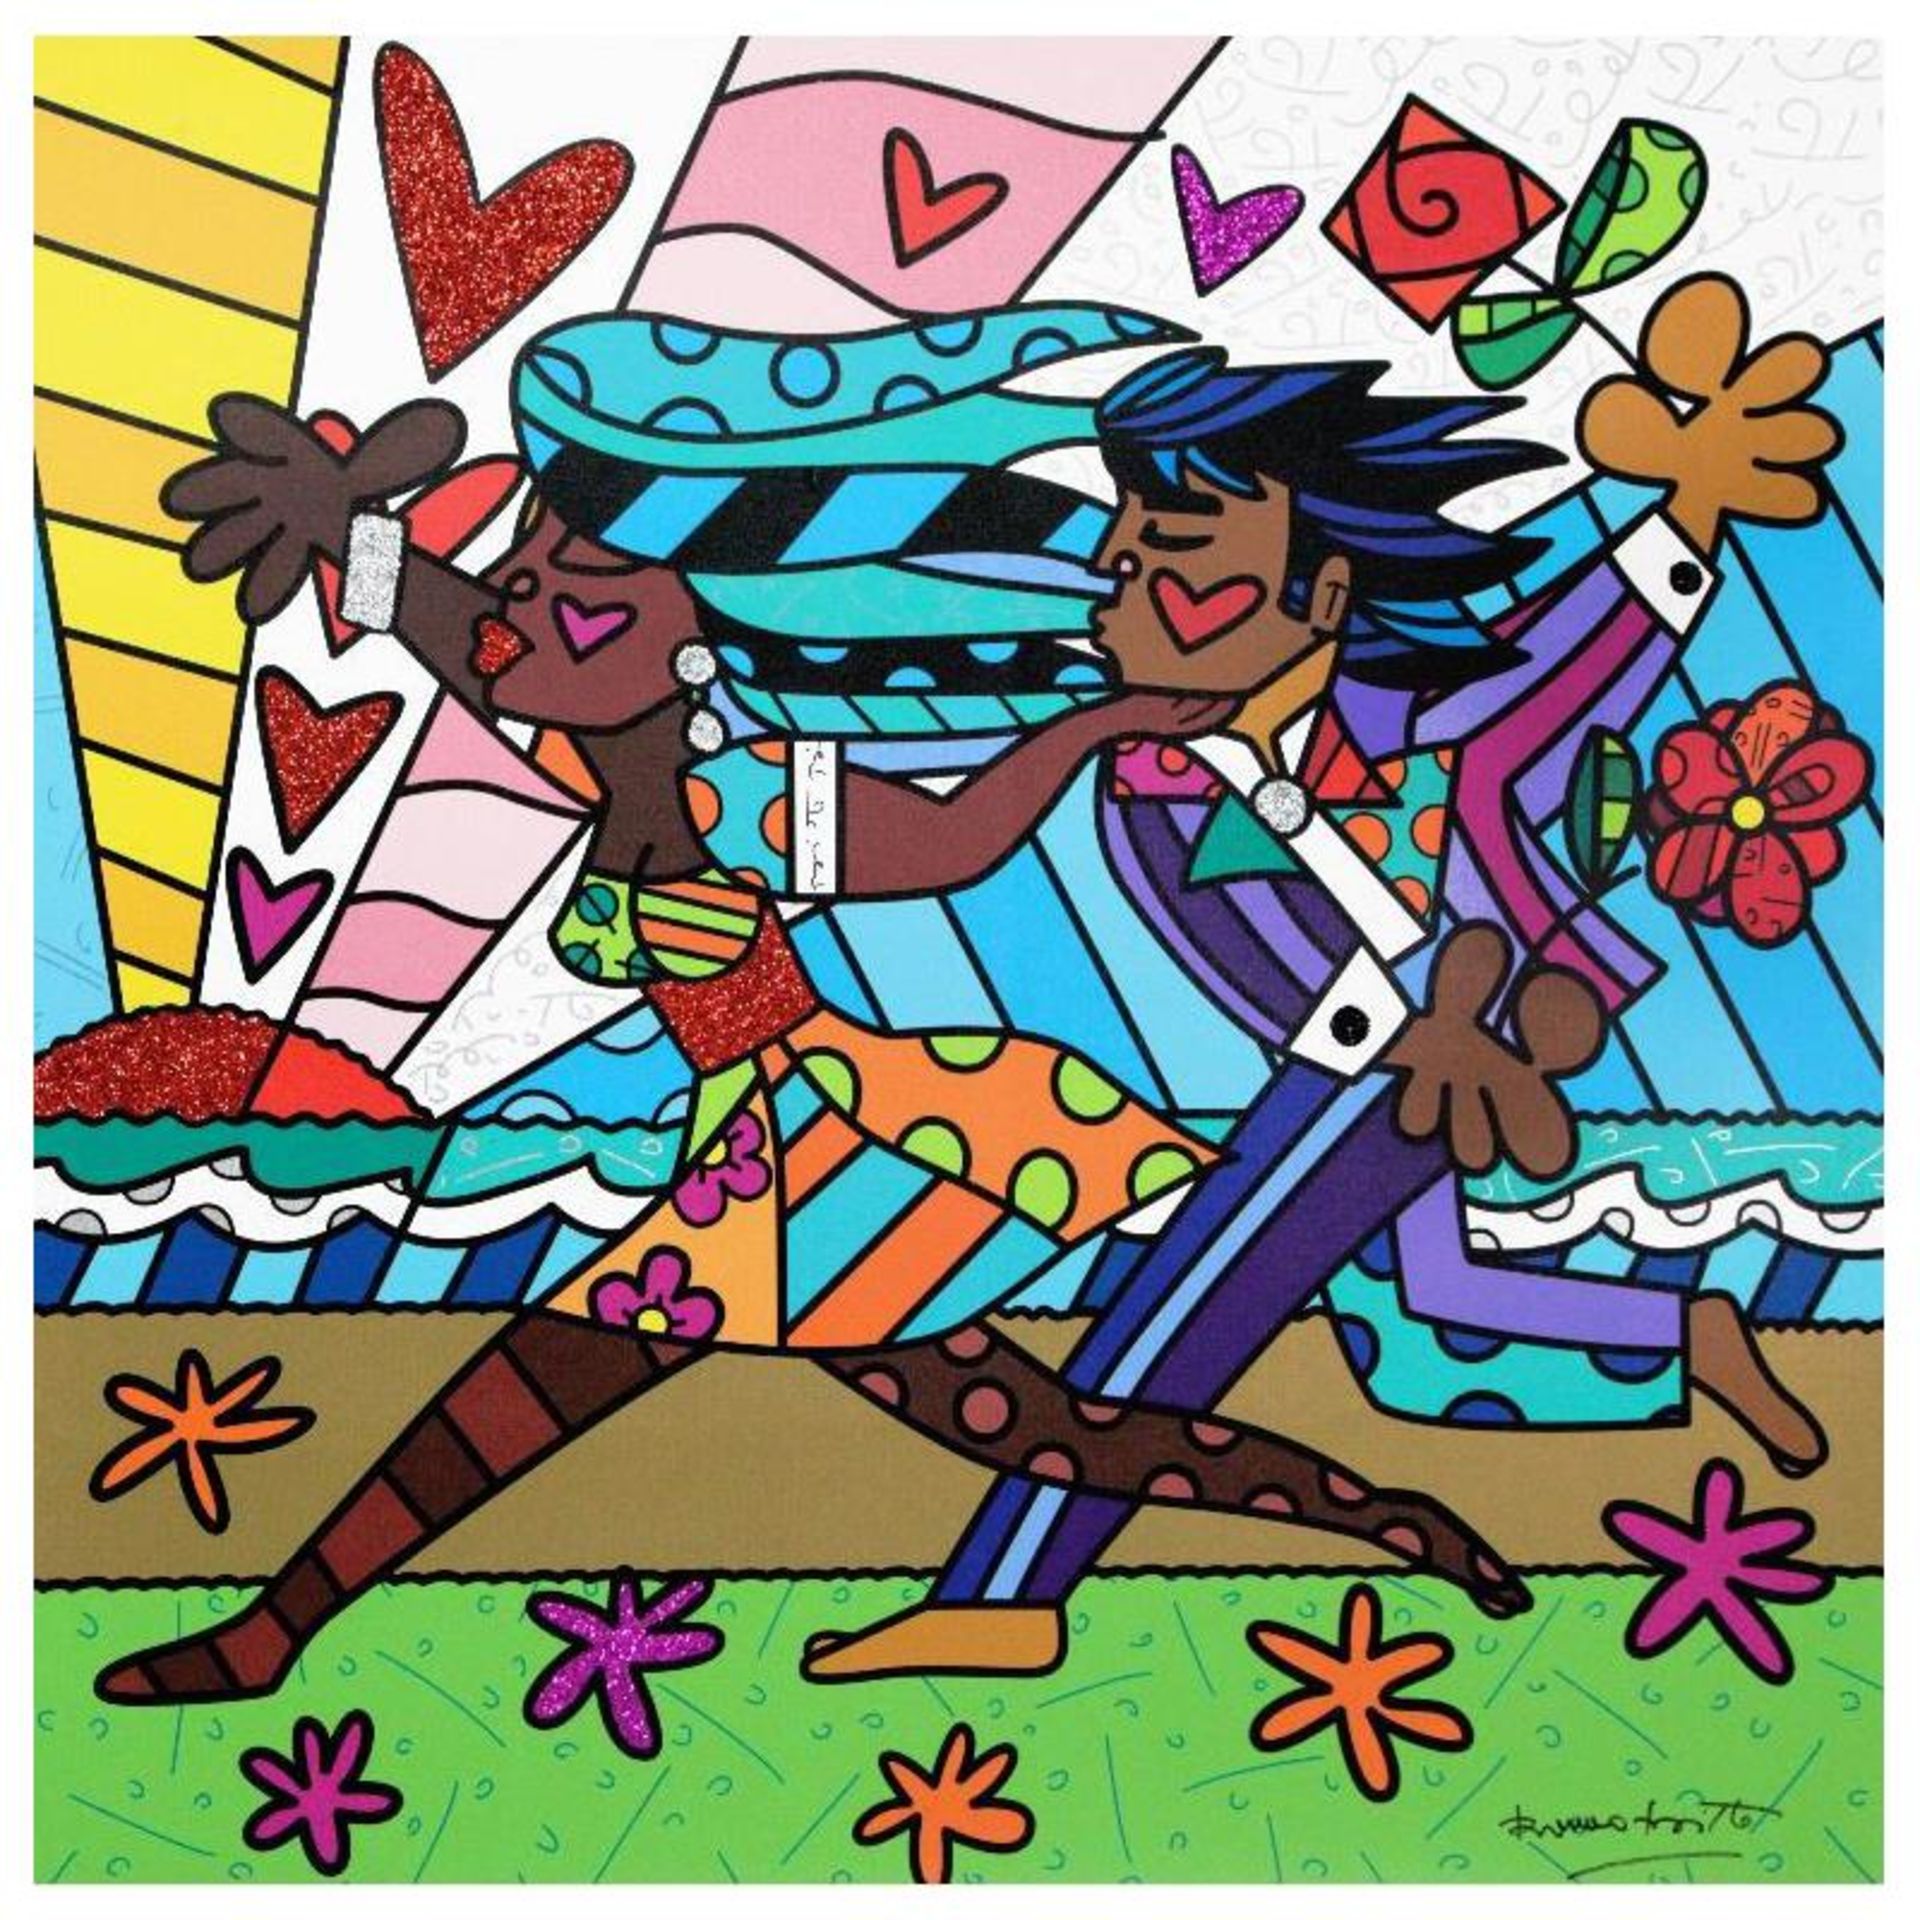 Romero Britto, "Amore Mio" Hand Signed Giclee on Canvas; Authenticated